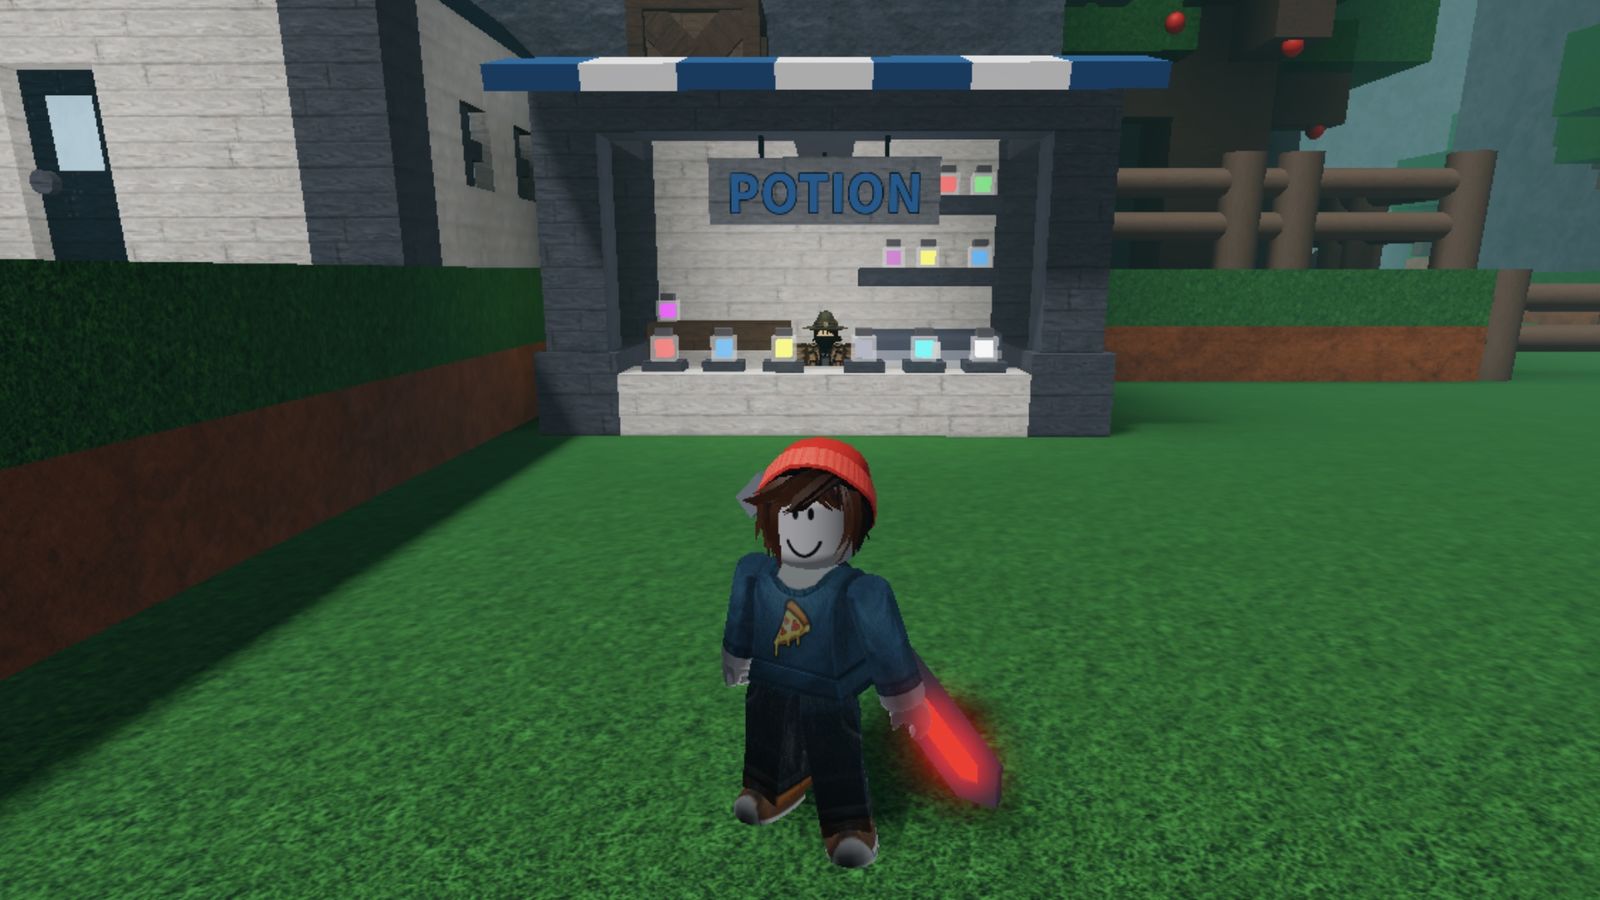 Screenshot from Critical Legends, showing a Roblox avatar in front of the potion store